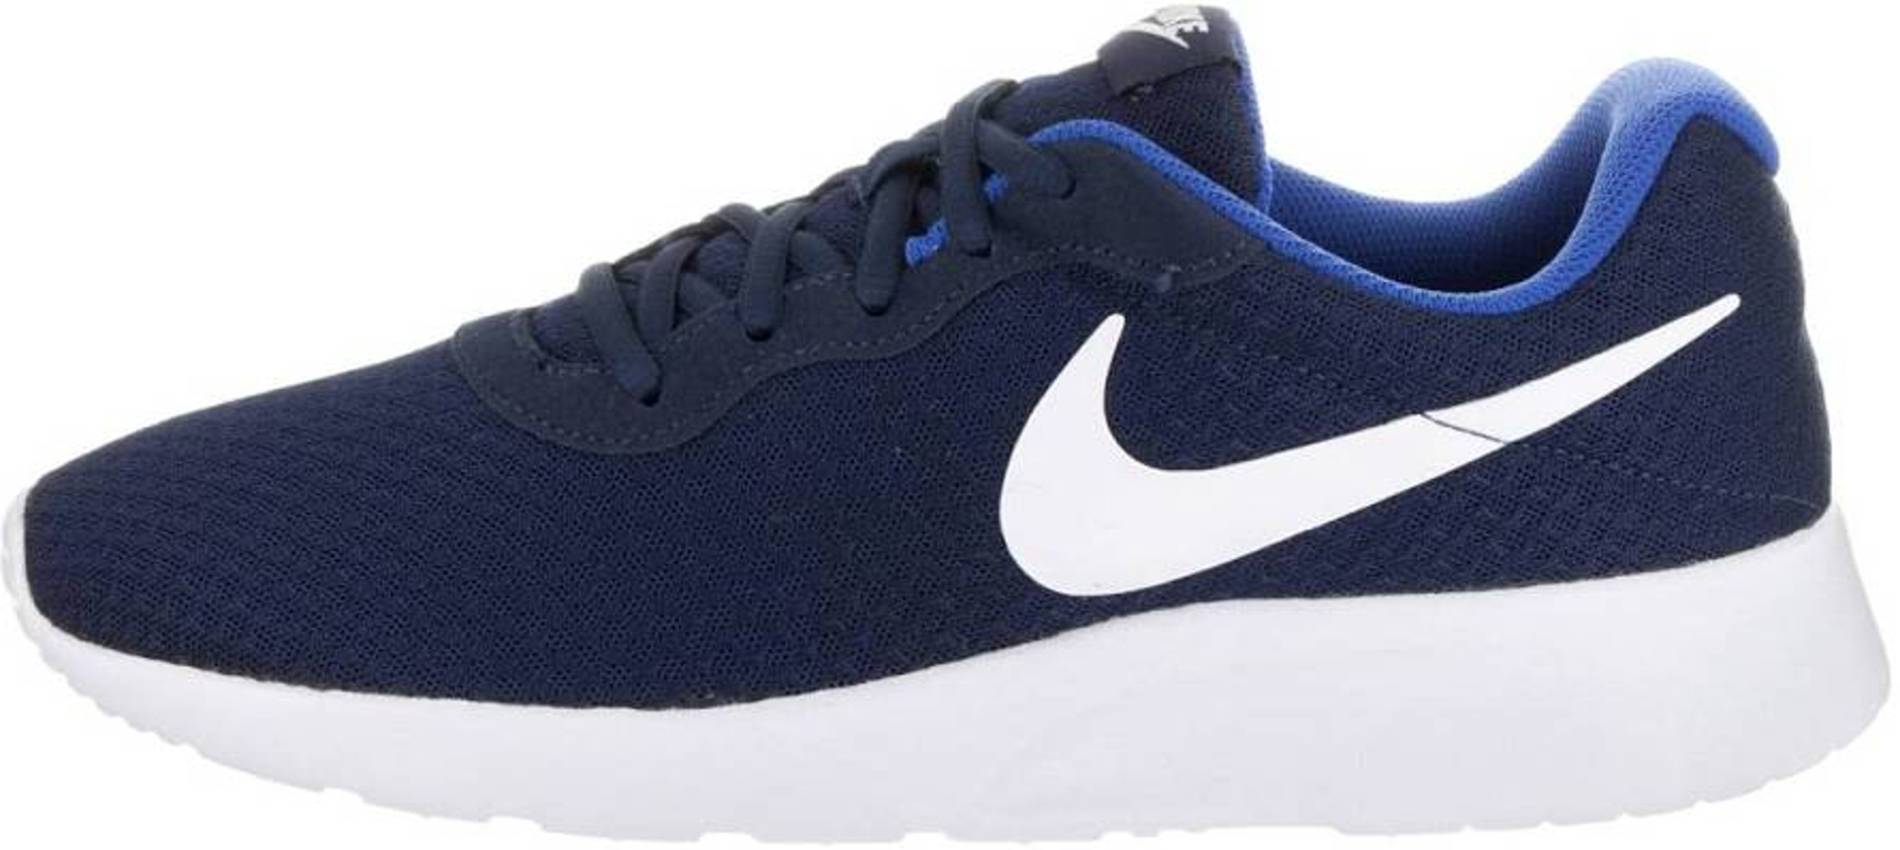 Save 41% on Blue Nike Sneakers (130 